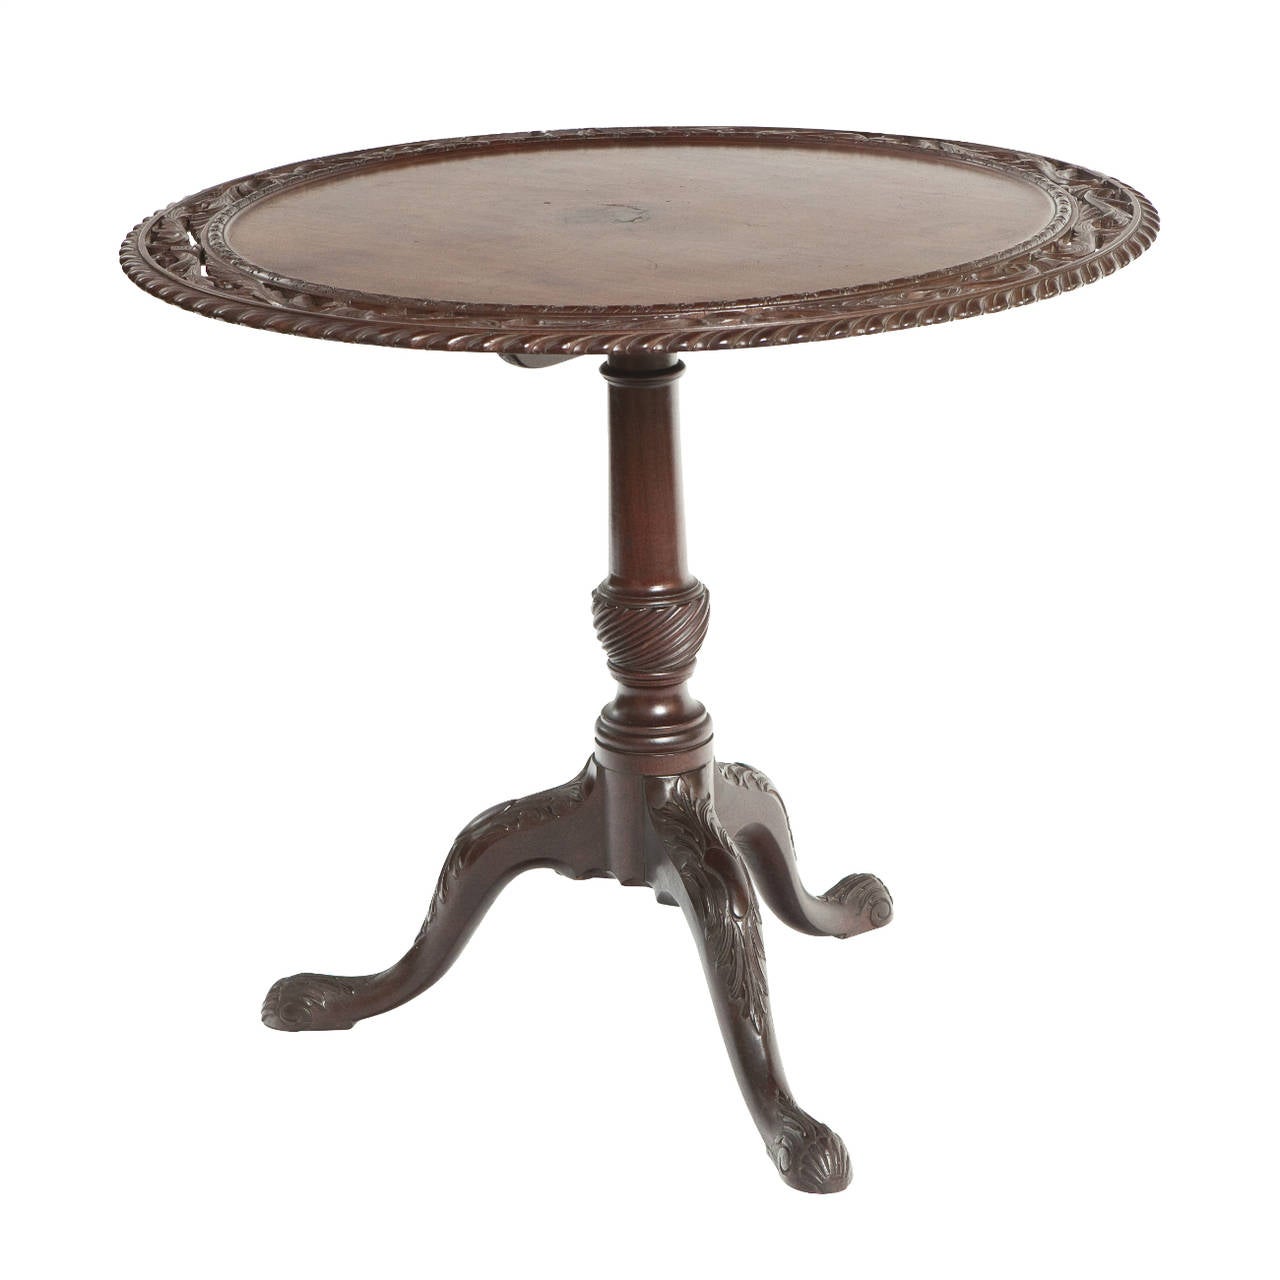 An absolutely stunning piece of furniture, this 18th century Irish mahogany table features a tilt top which has been expertly carved from a single piece of timber. With beautifully carved legs, and the tabletop boasting some gorgeous piercing, this